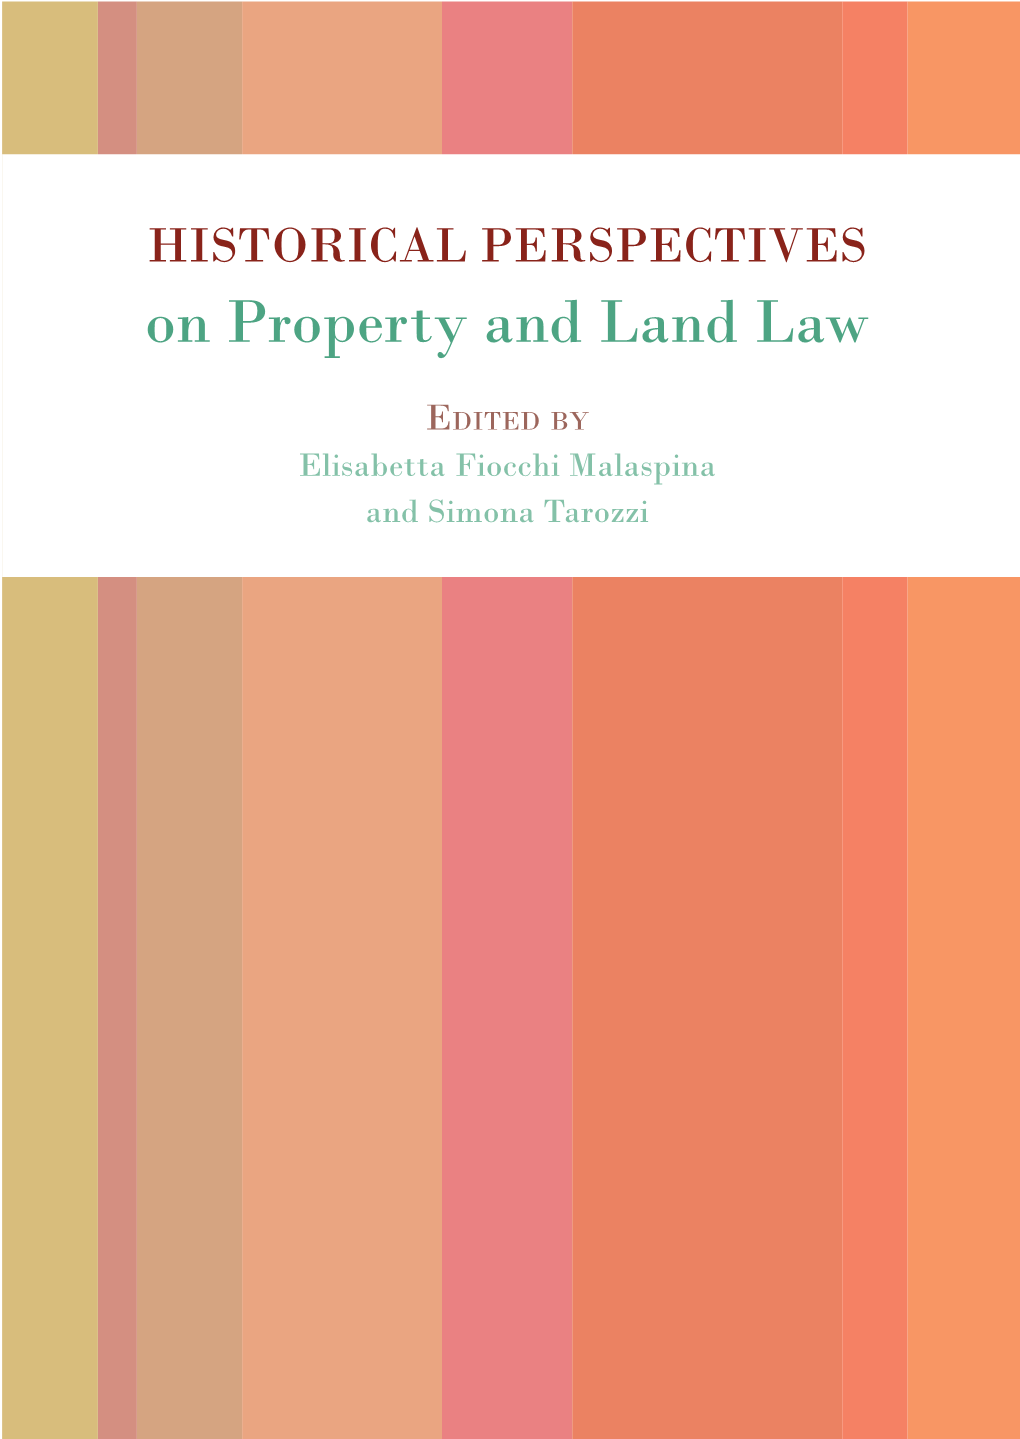 Historical Perspectives on Property and Land Law. an Interdisciplinary Dialogue on Methods and Research Approaches, Madrid 2019, 236 Pp